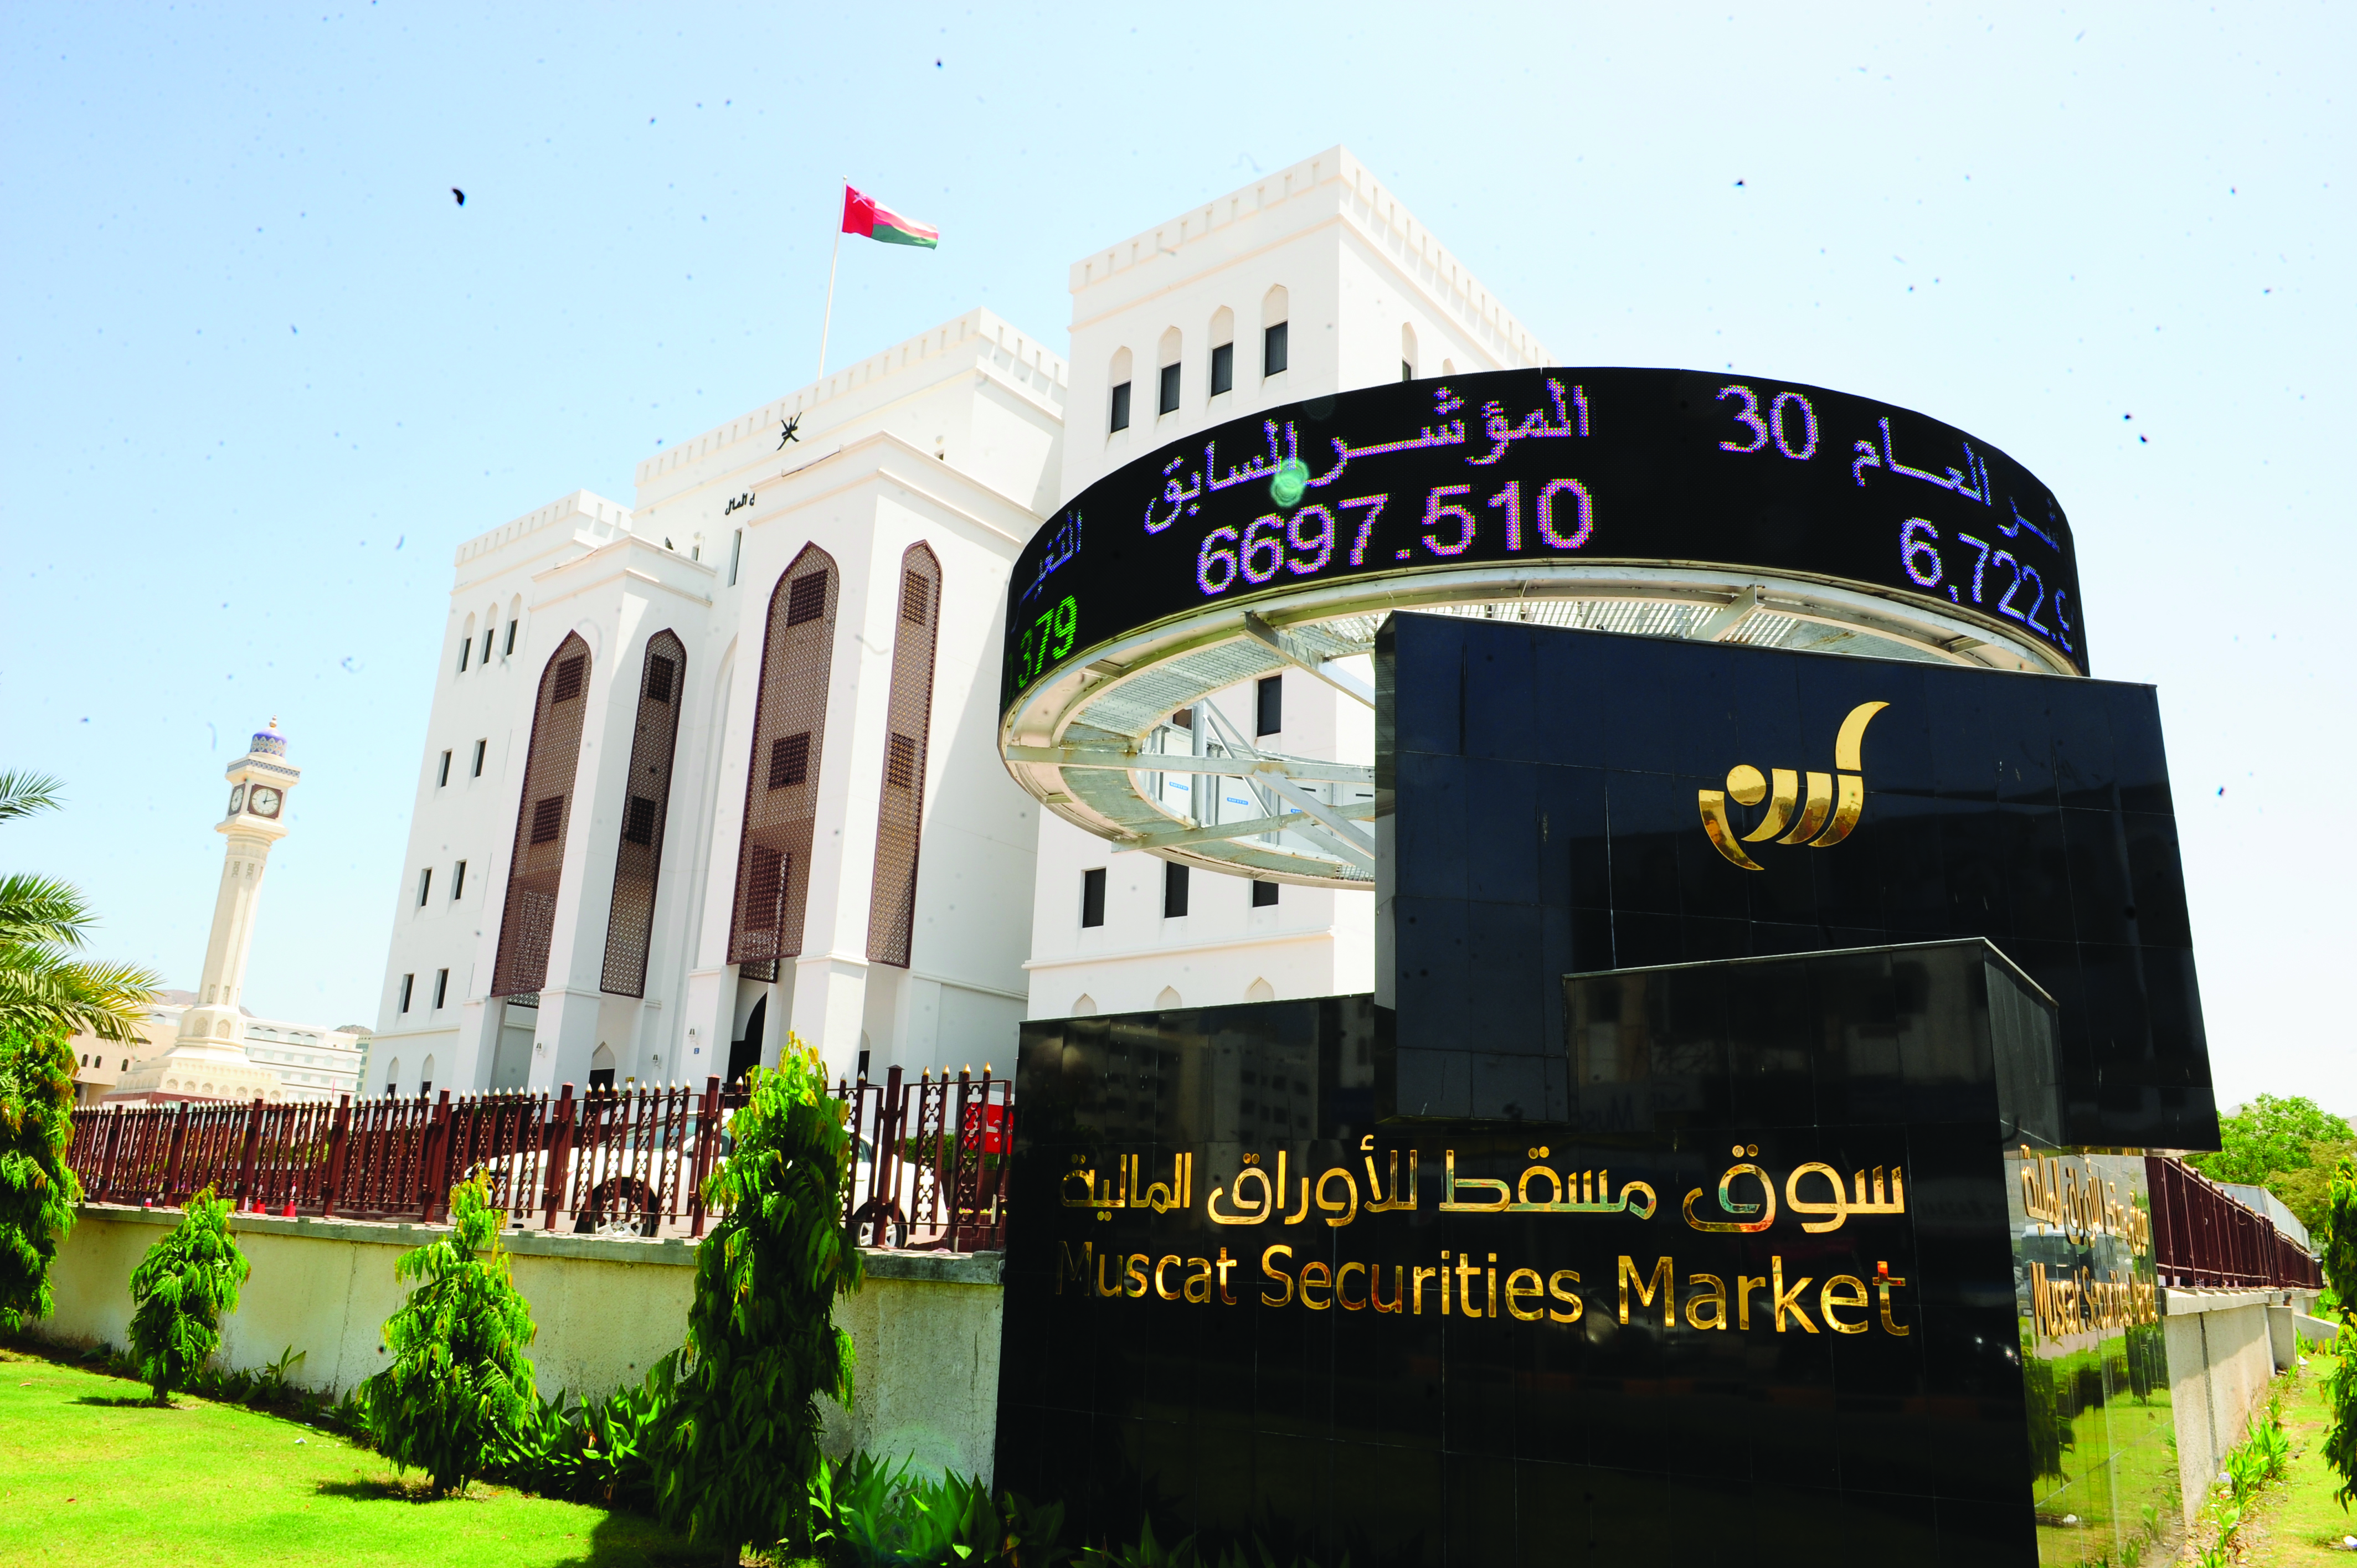 Oman Hotels plans to buyback shares from minority shareholders